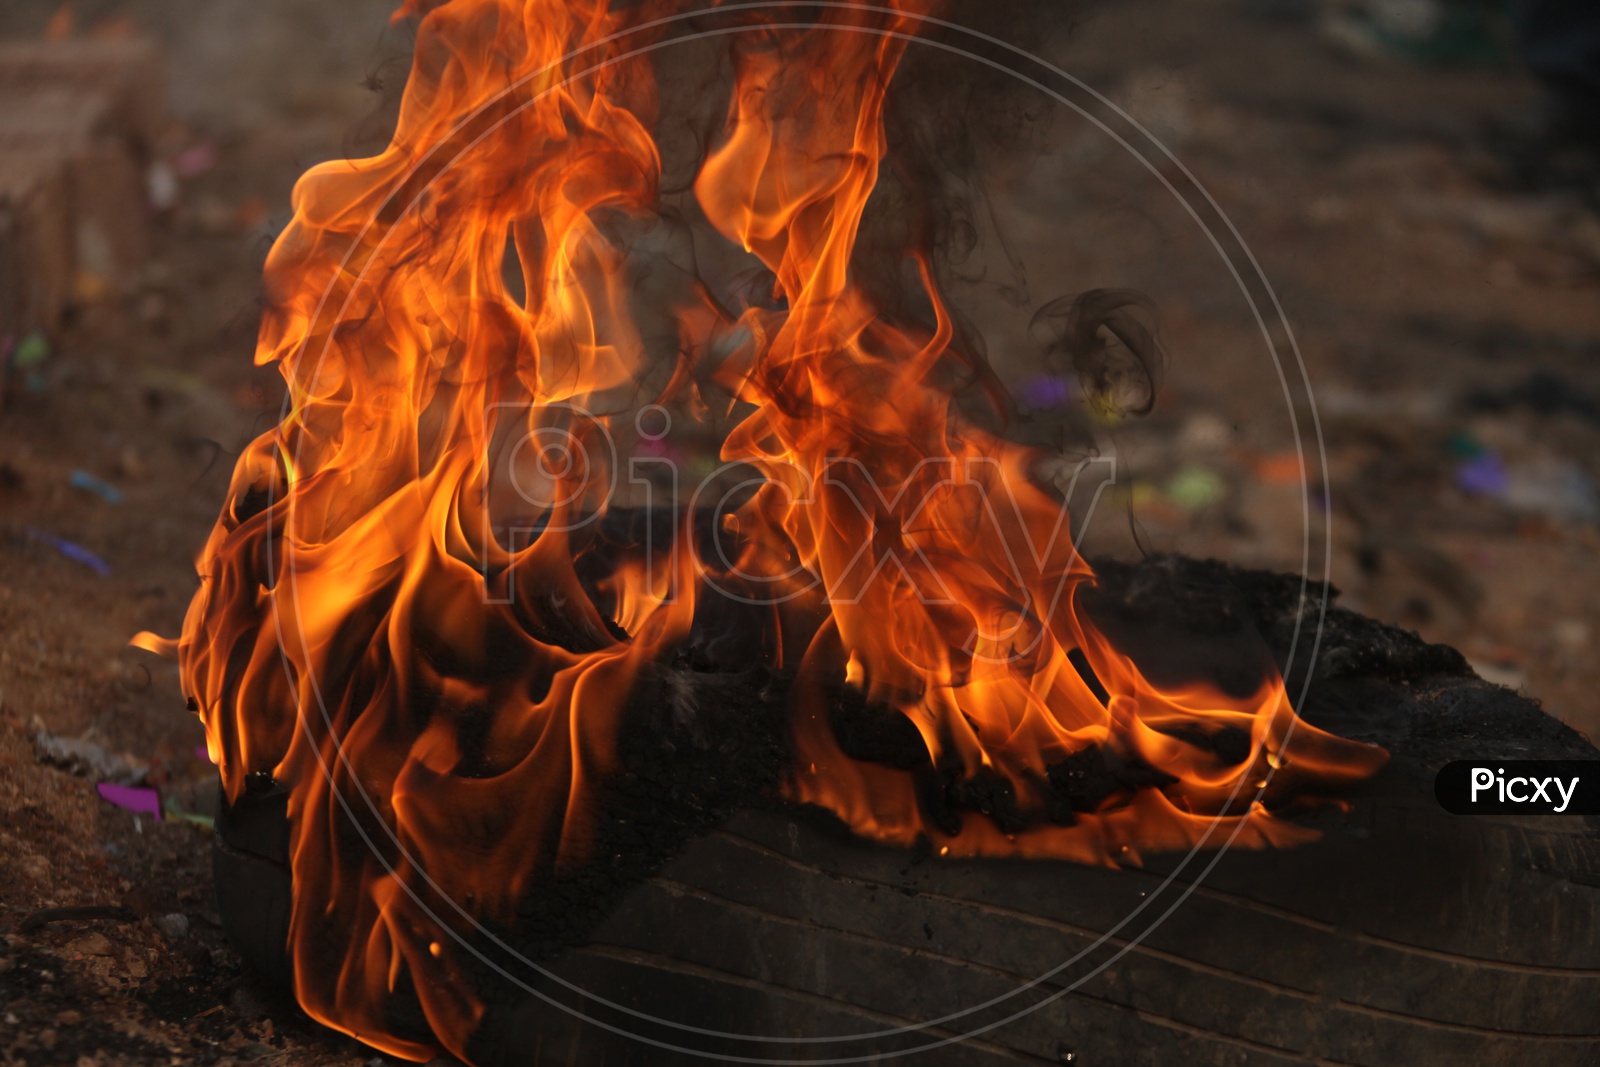 Photograph of  Fire flames from burning tyre